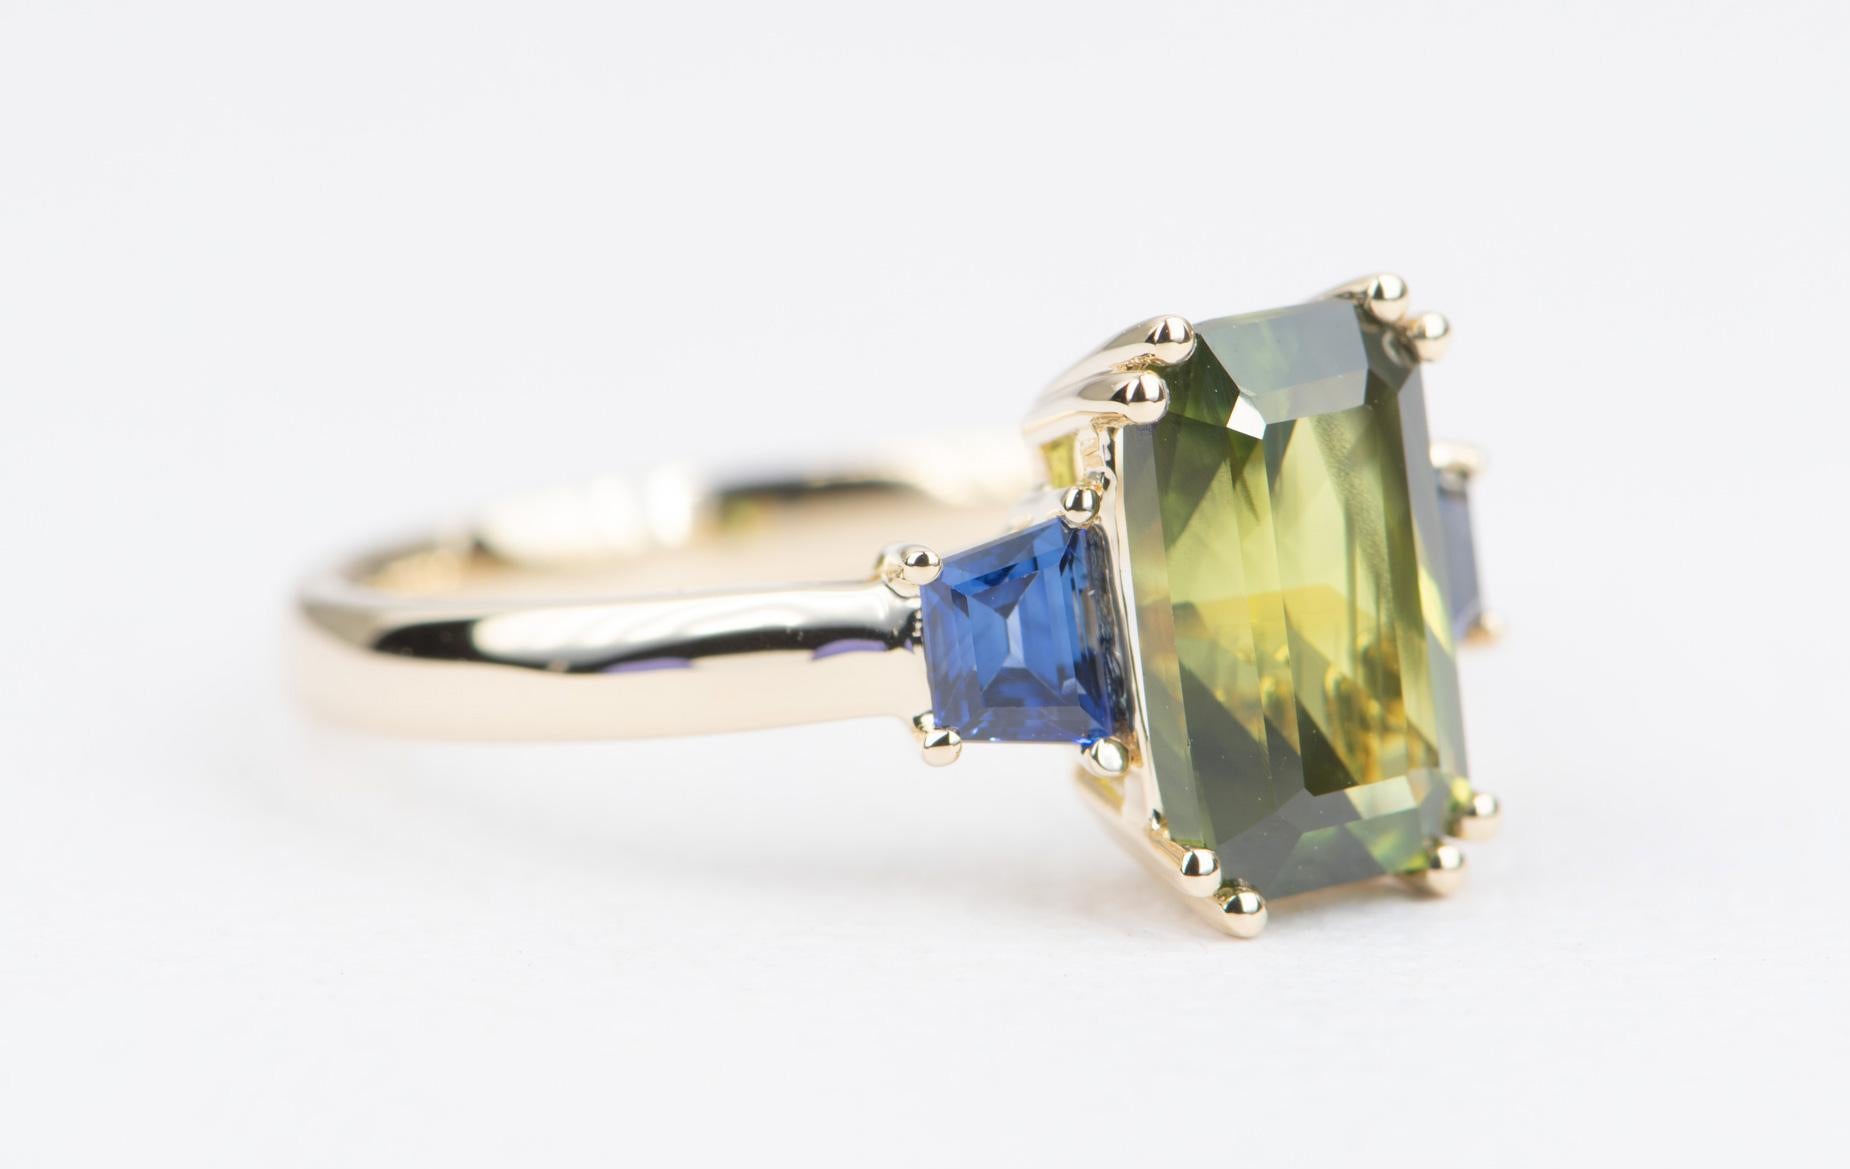 ♥  Solid 14K yellow gold ring with an emerald-shaped green sapphire in the center, flanked by blue sapphire on the sides

♥  Material: 14K yellow gold
♥  US Size: 7 (Free resizing)
♥  Band width: 2.7mm
♥  Gemstone: Center sapphire is 2.98ct; side